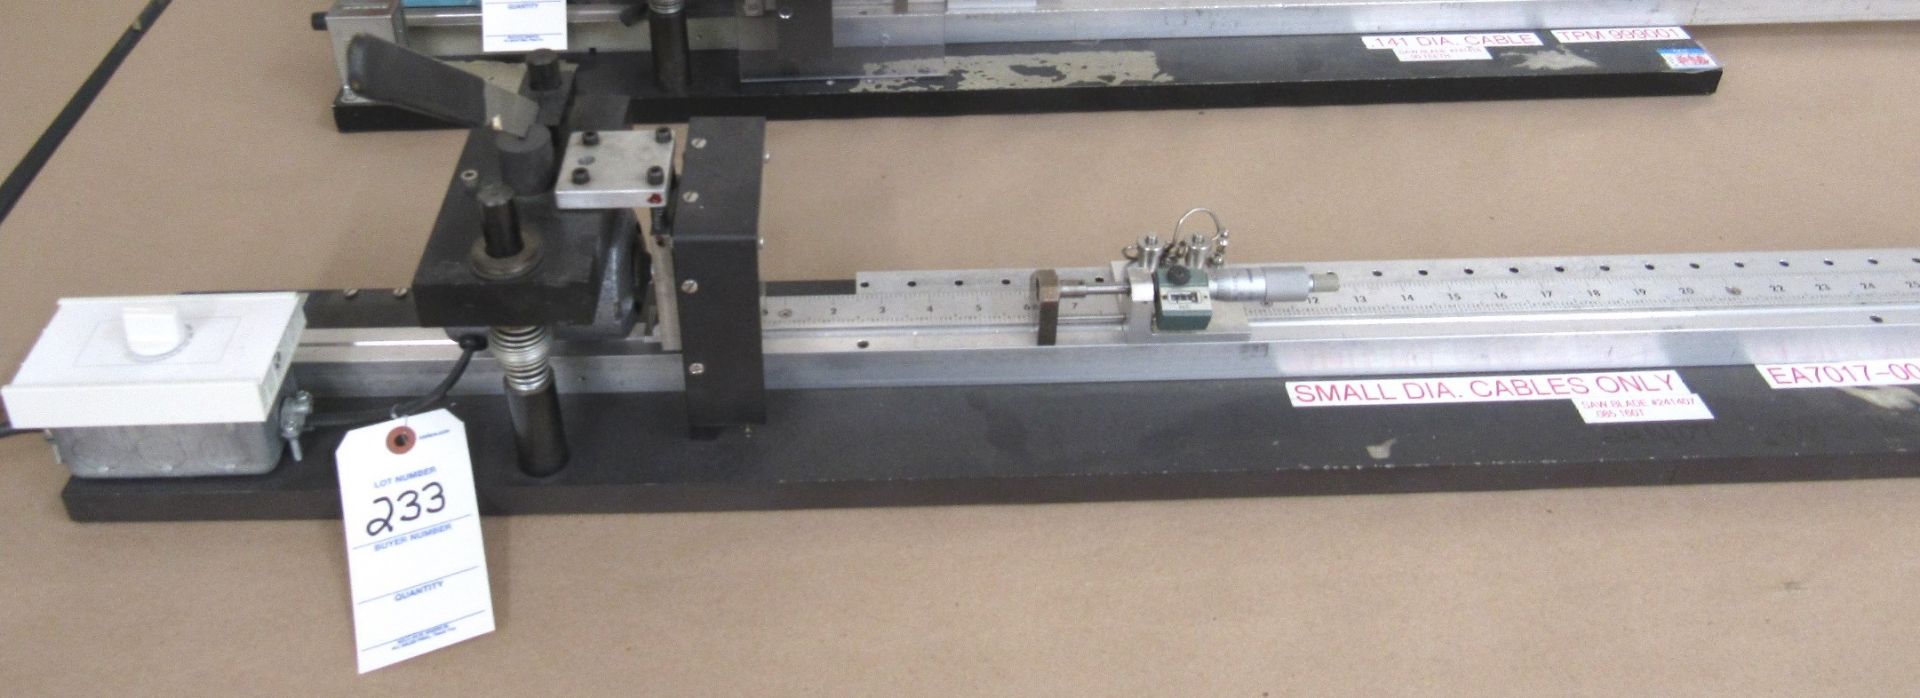 Sevens T-500 Cable Cut-Off Saw- 0.085 and 0.141 Semi Rigid CoAxial Cable Capacity - Image 2 of 2